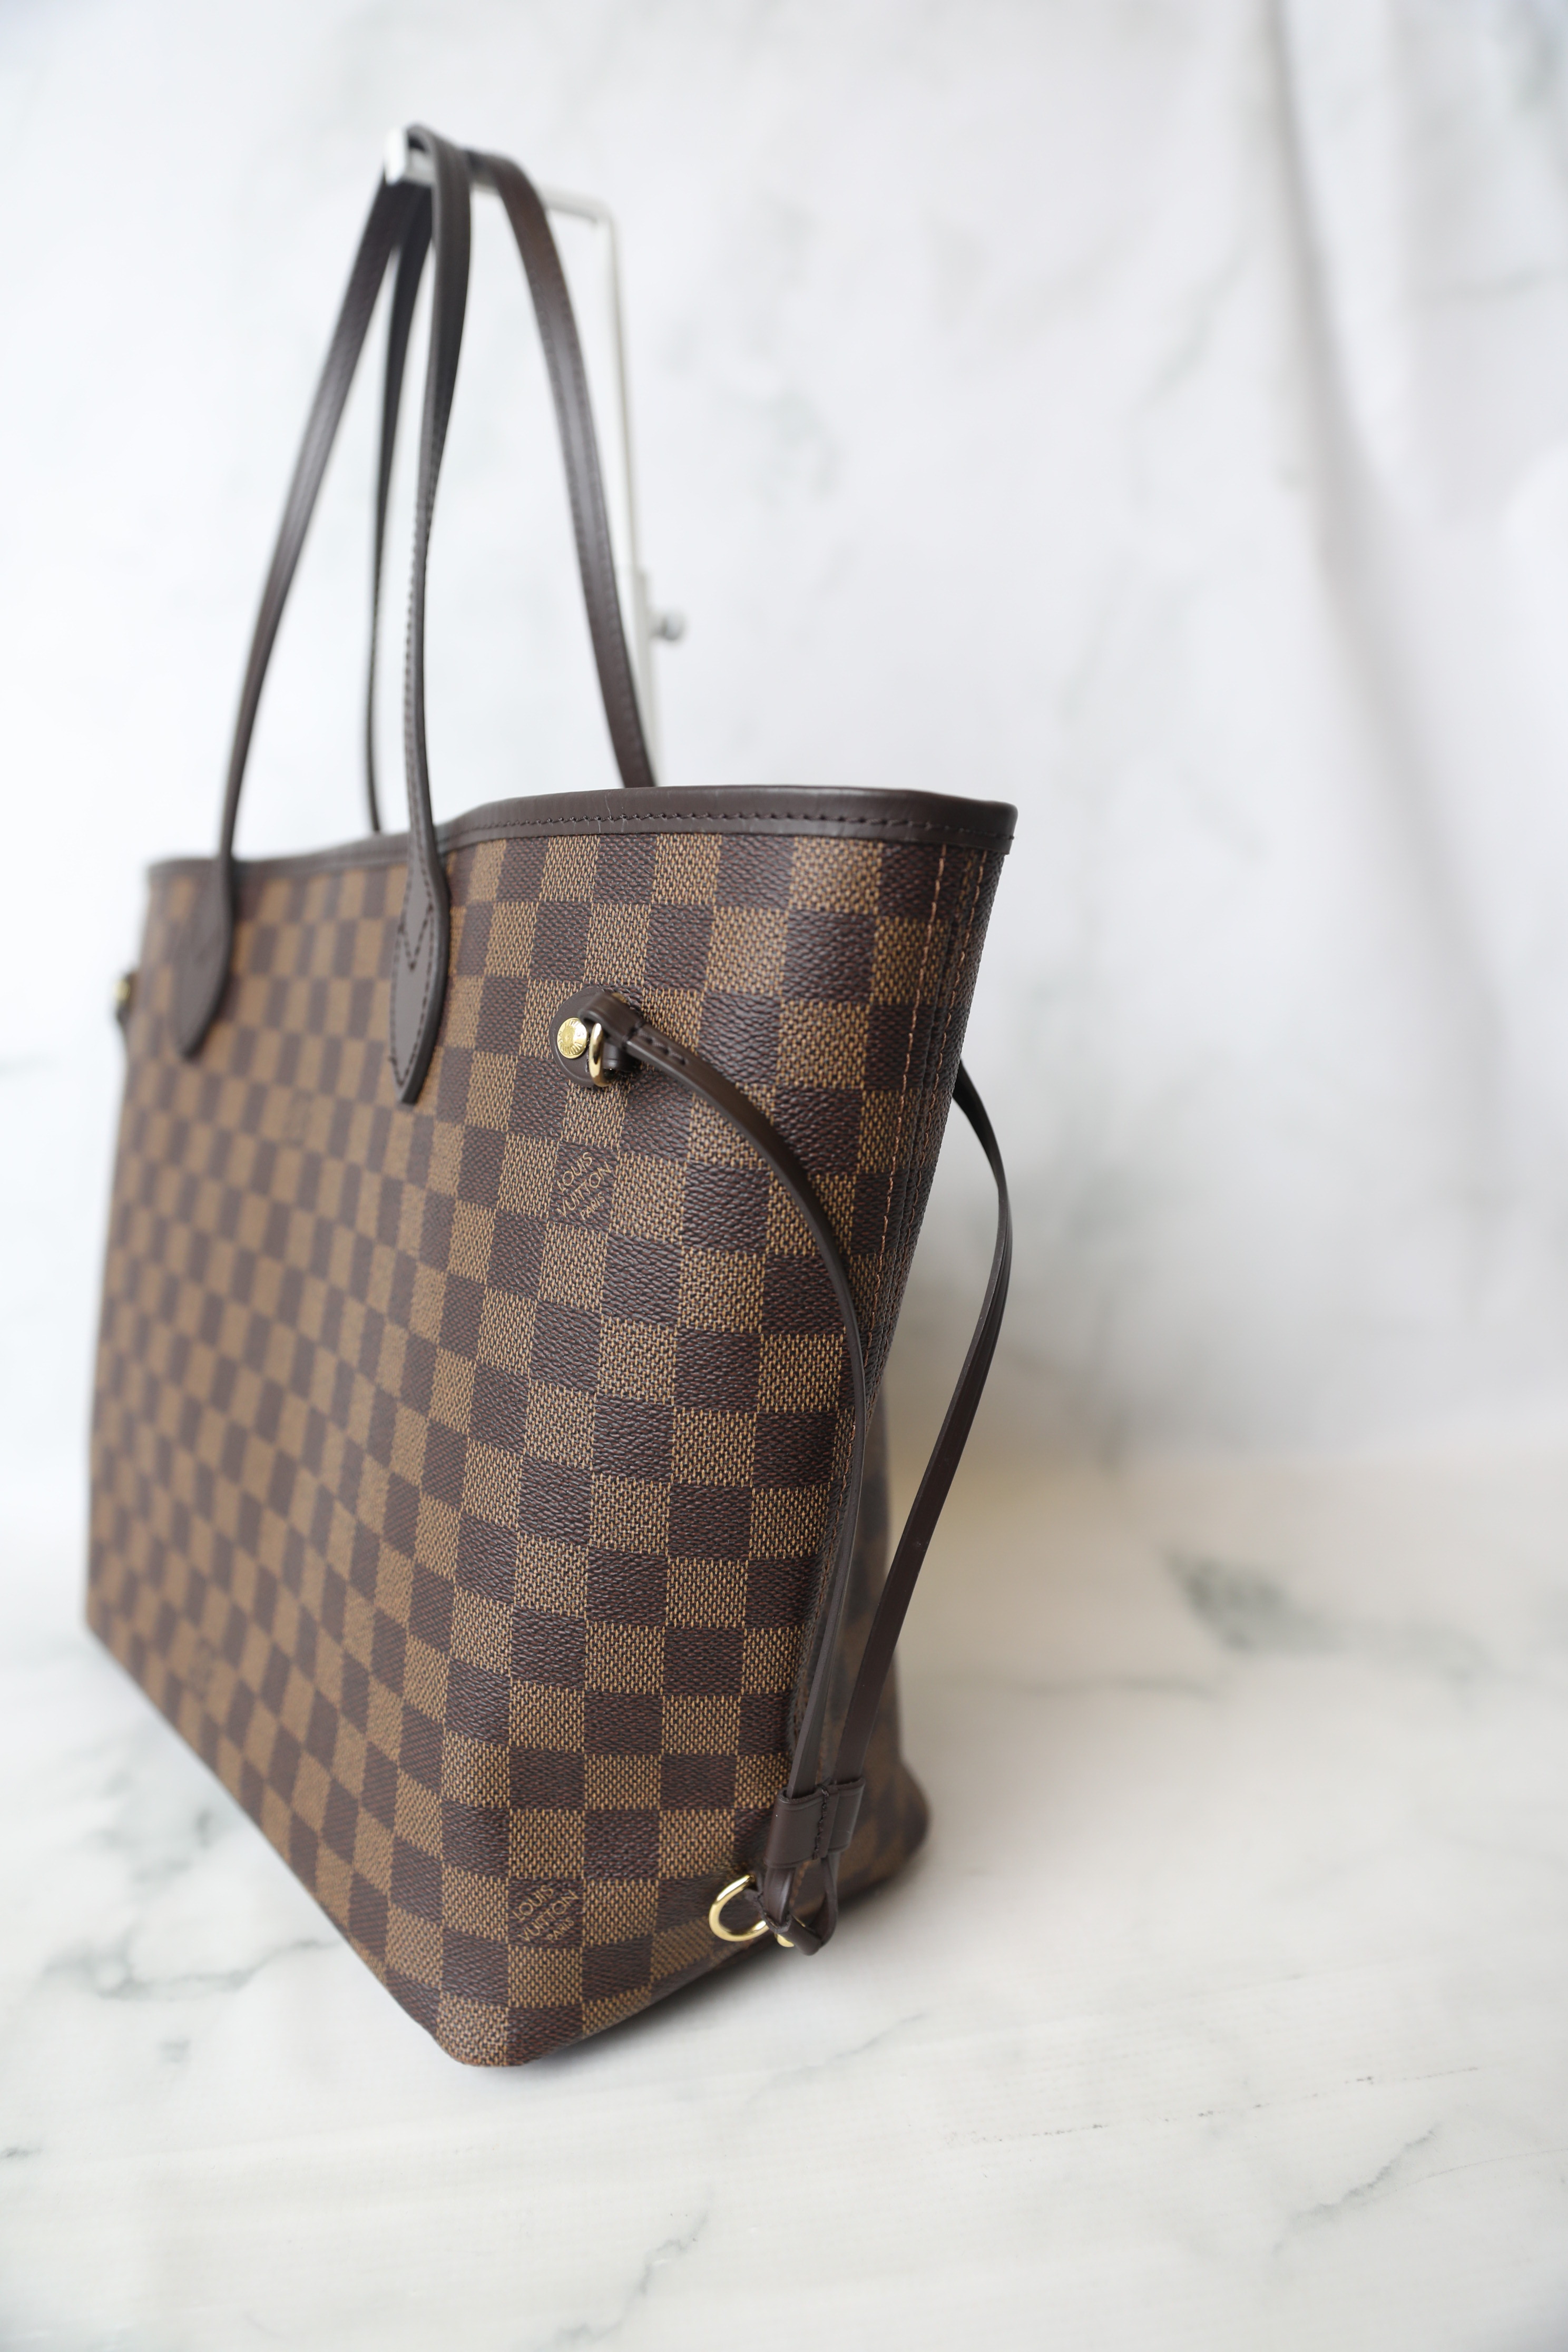 Louis Vuitton Damier New Neverfull MM N41358 Tote Bag Shoulder Bag with  Pouch 82